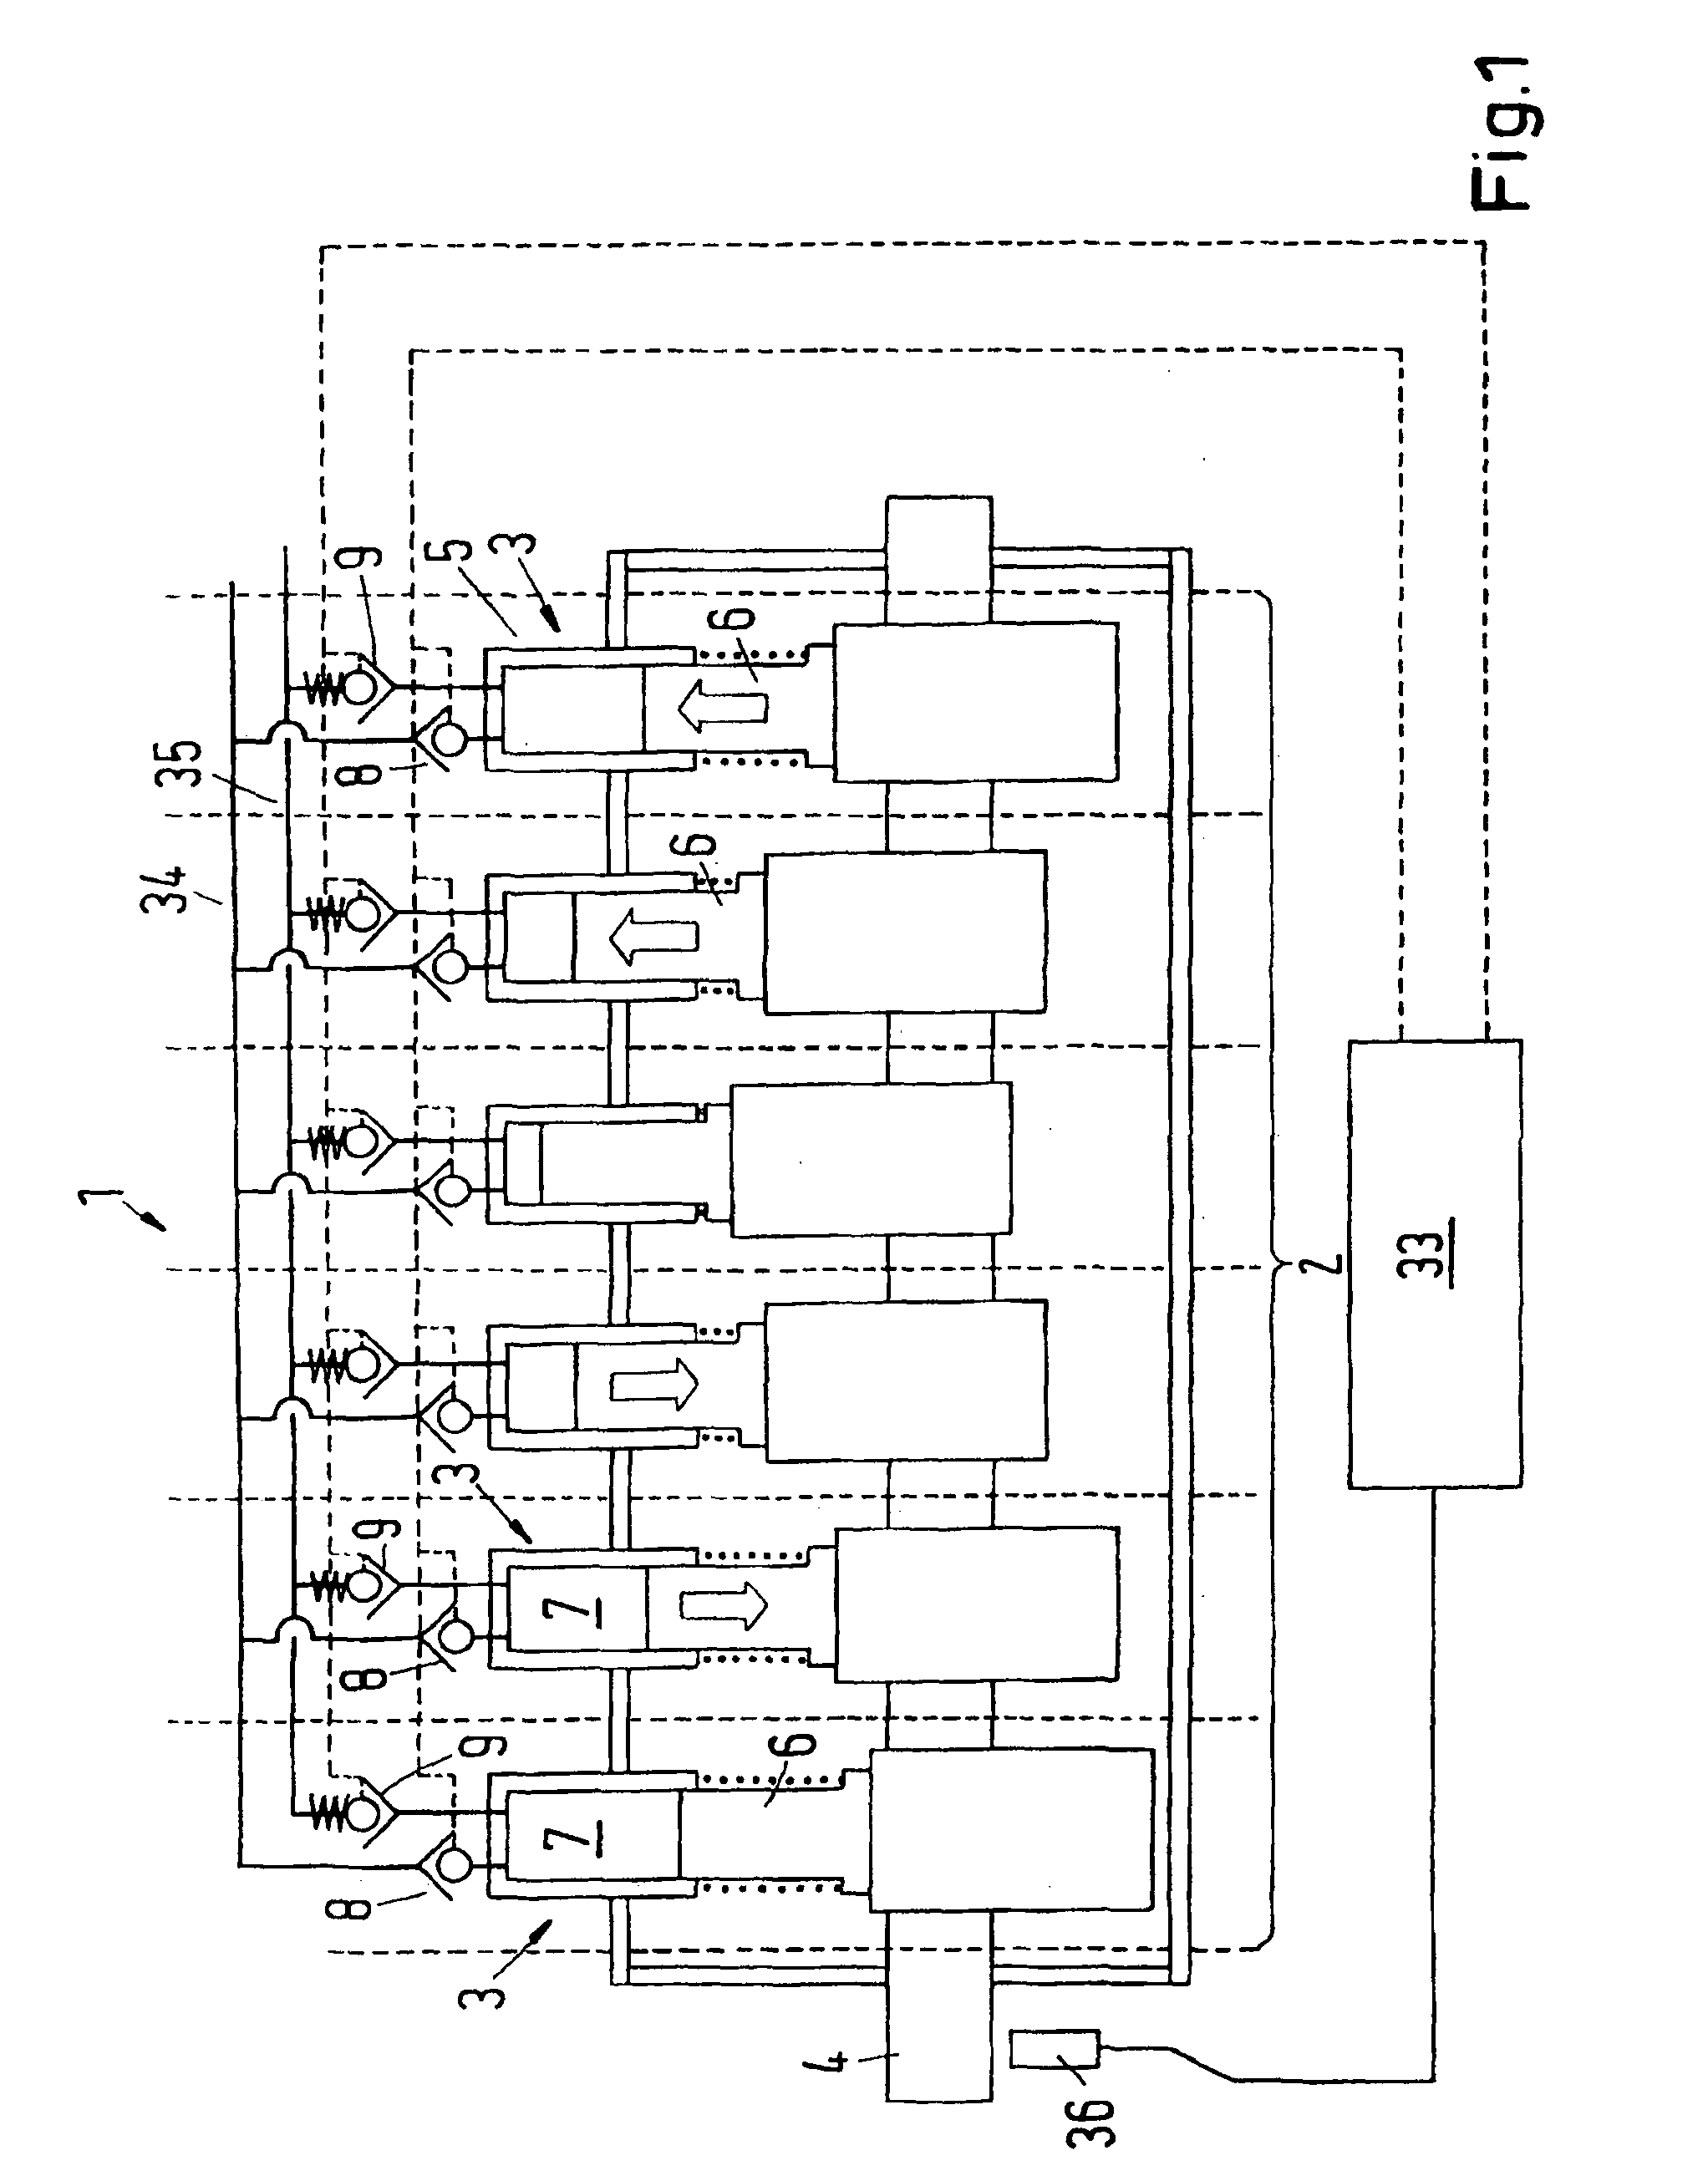 Operating method for fluid working machine